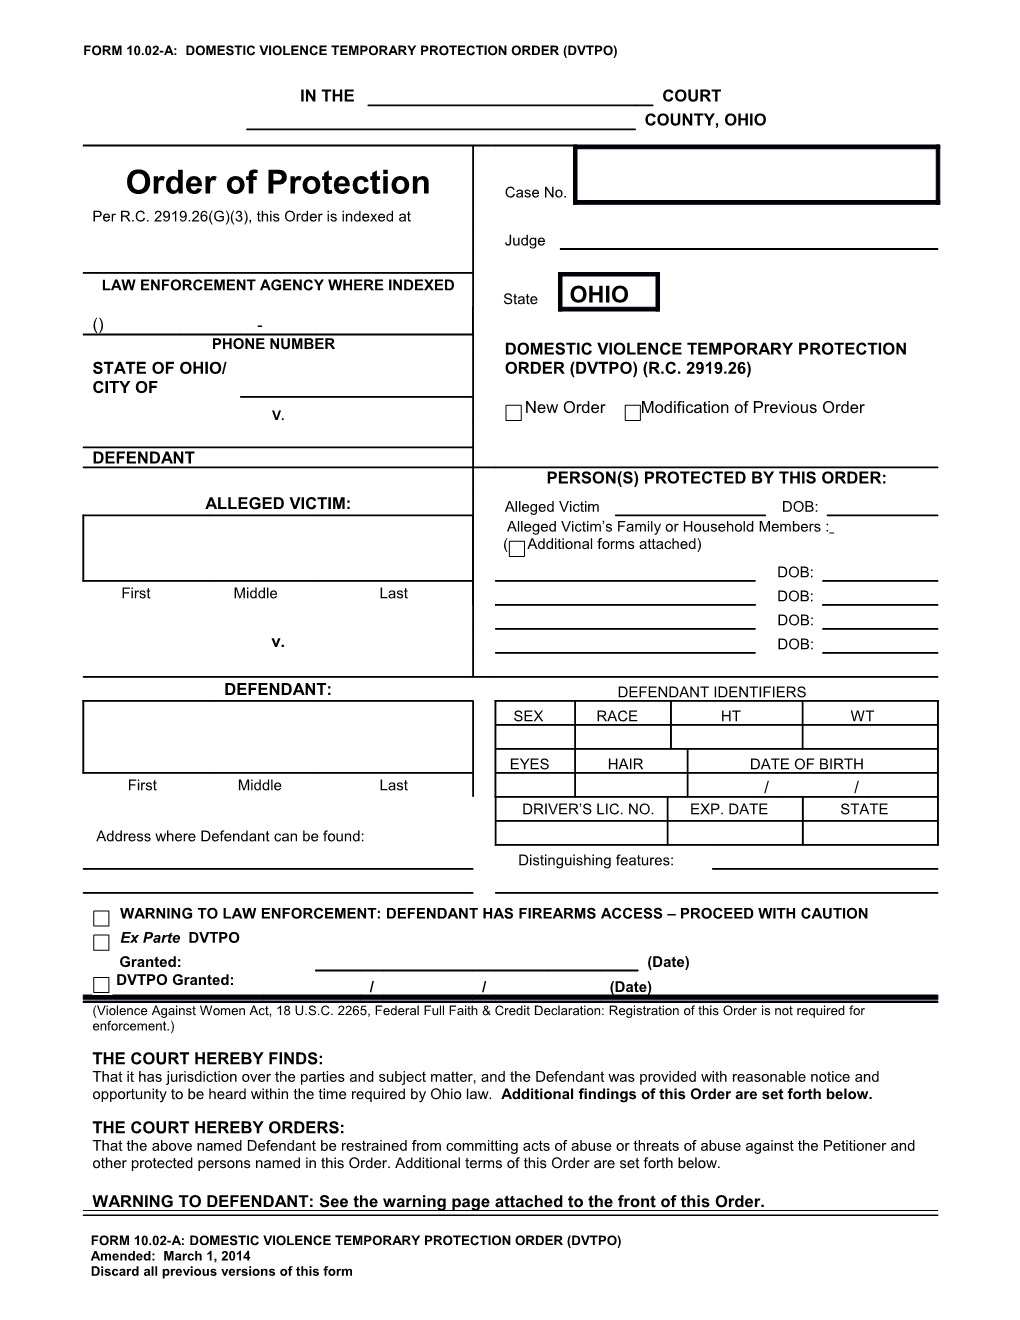 Form 10.02-A: Domestic Violence Temporary Protection Order (Dvtpo)